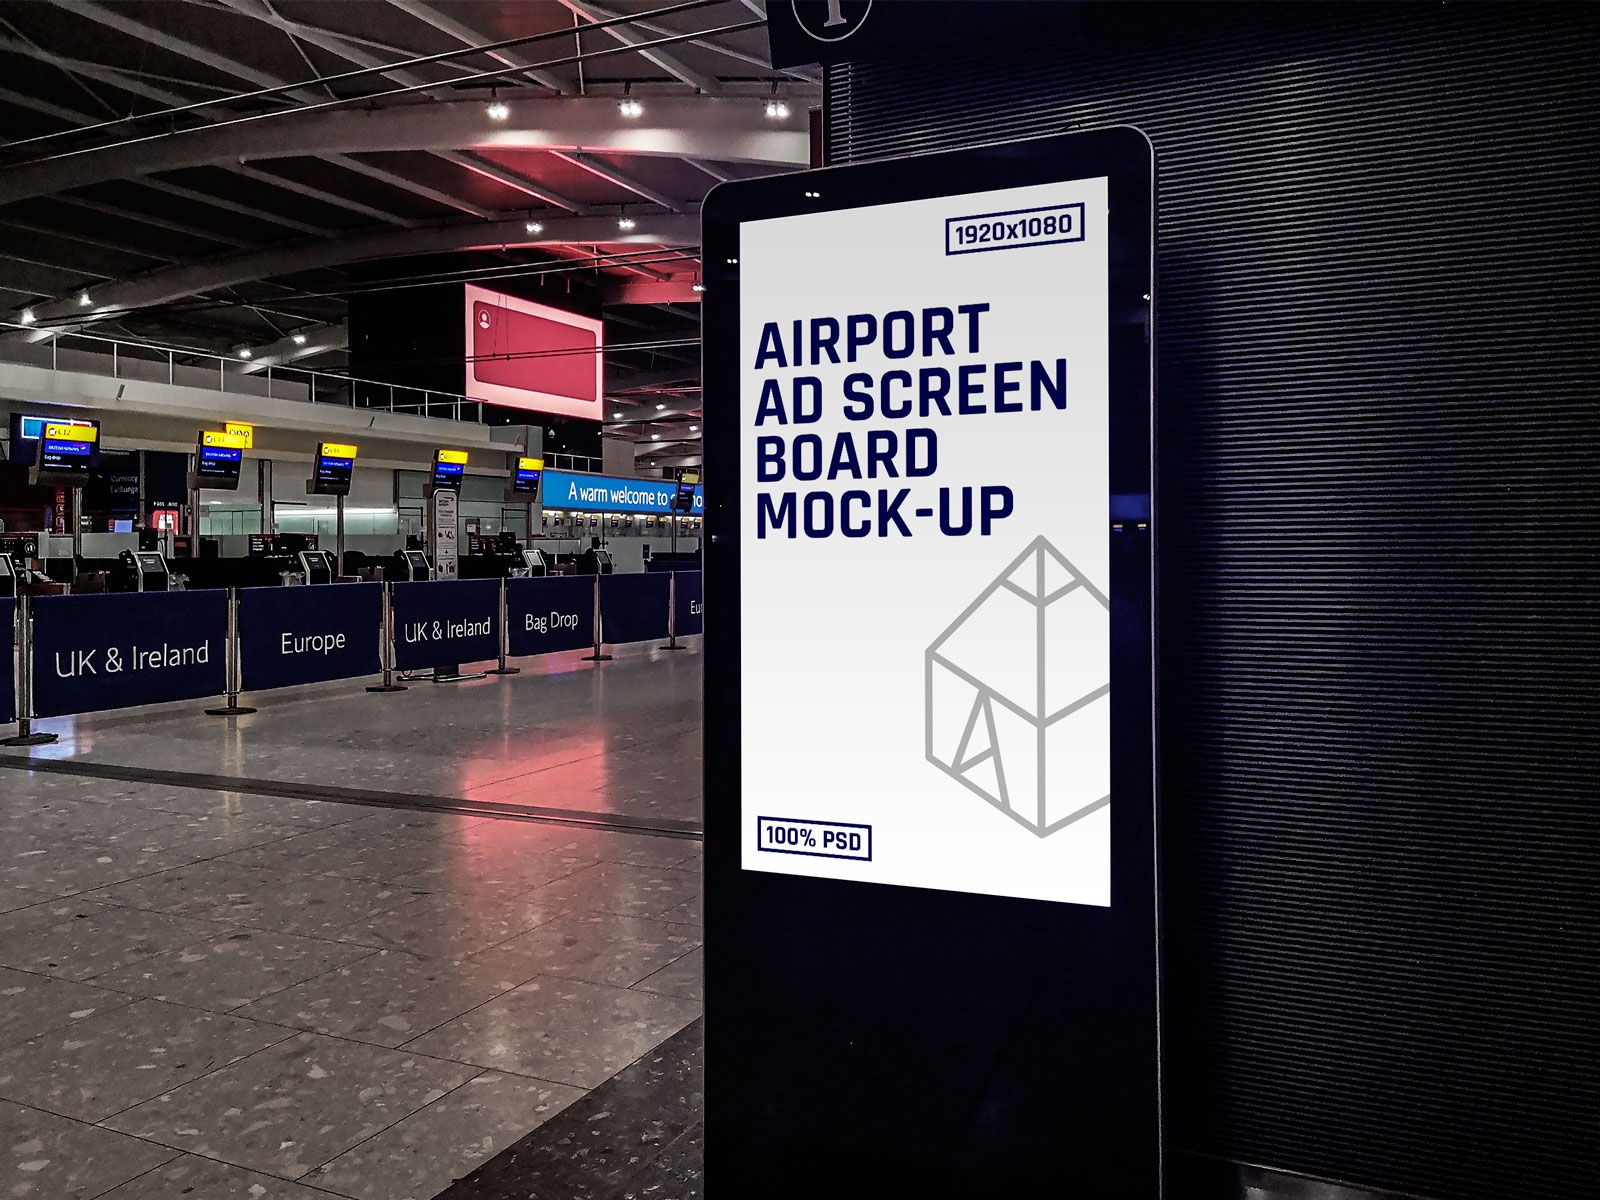 Download Clean Airport Ad Screen Board Mockup - Free Download